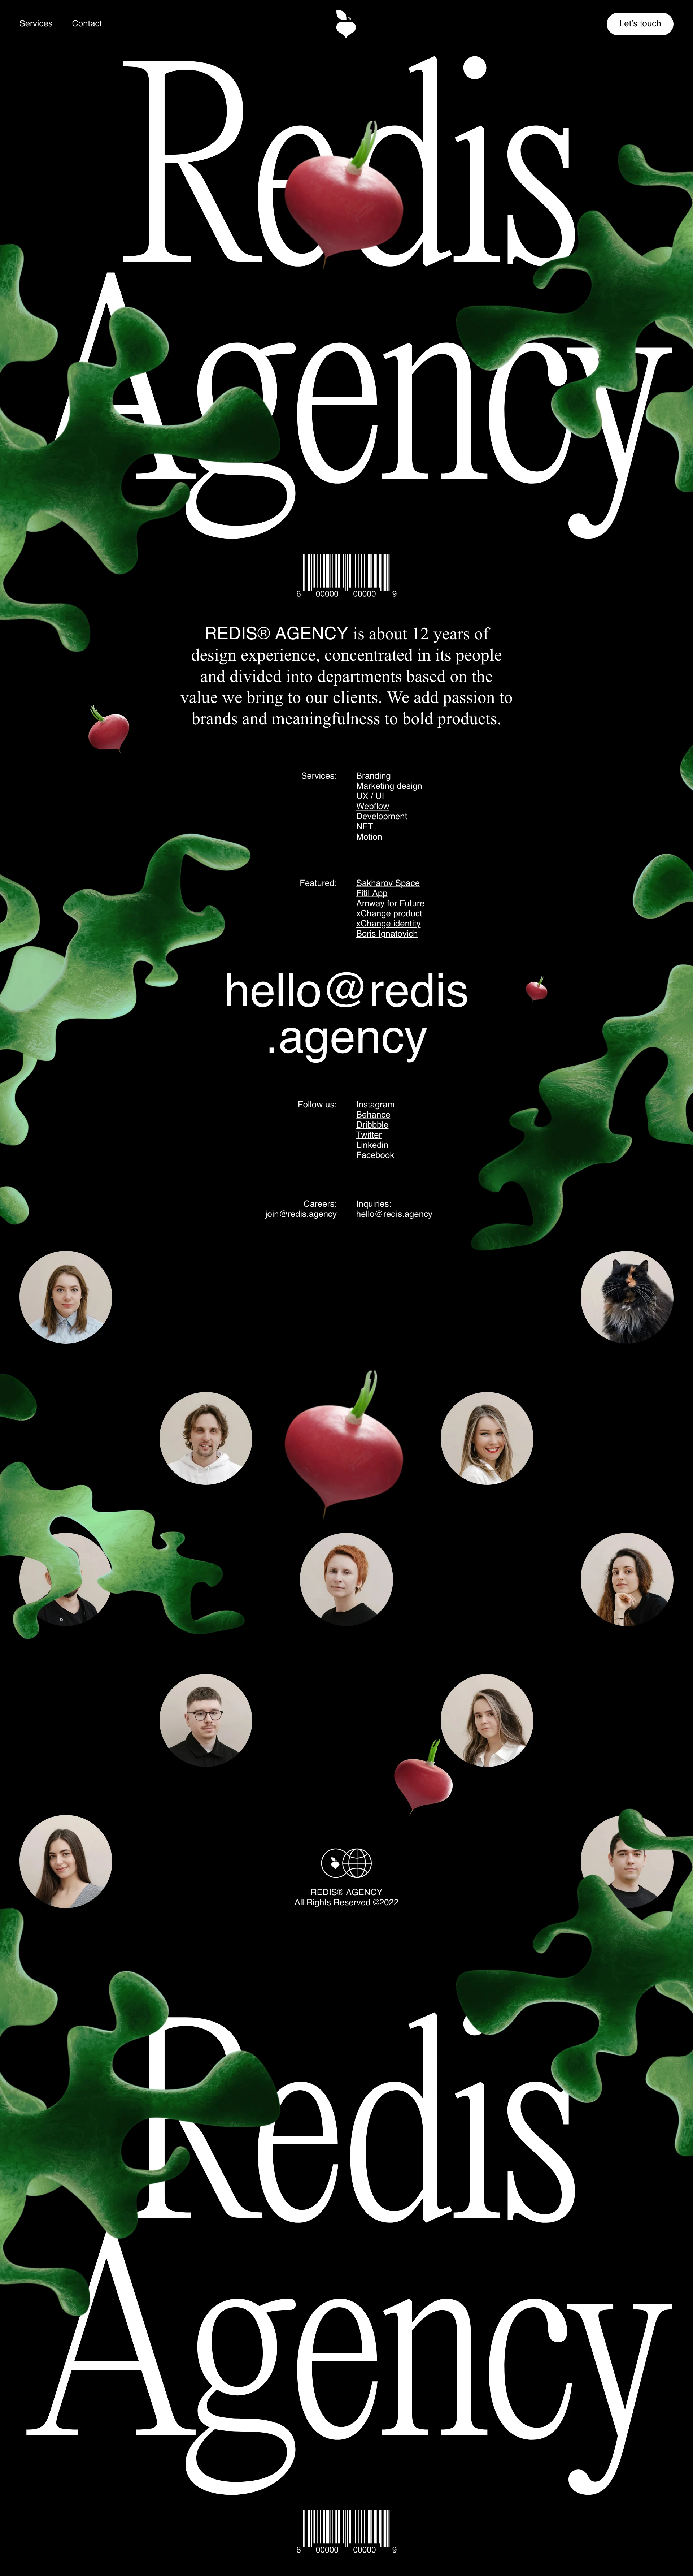 Redis Landing Page Example: We bring freshness, meaning and emotion to corporate solutions, services and startups.